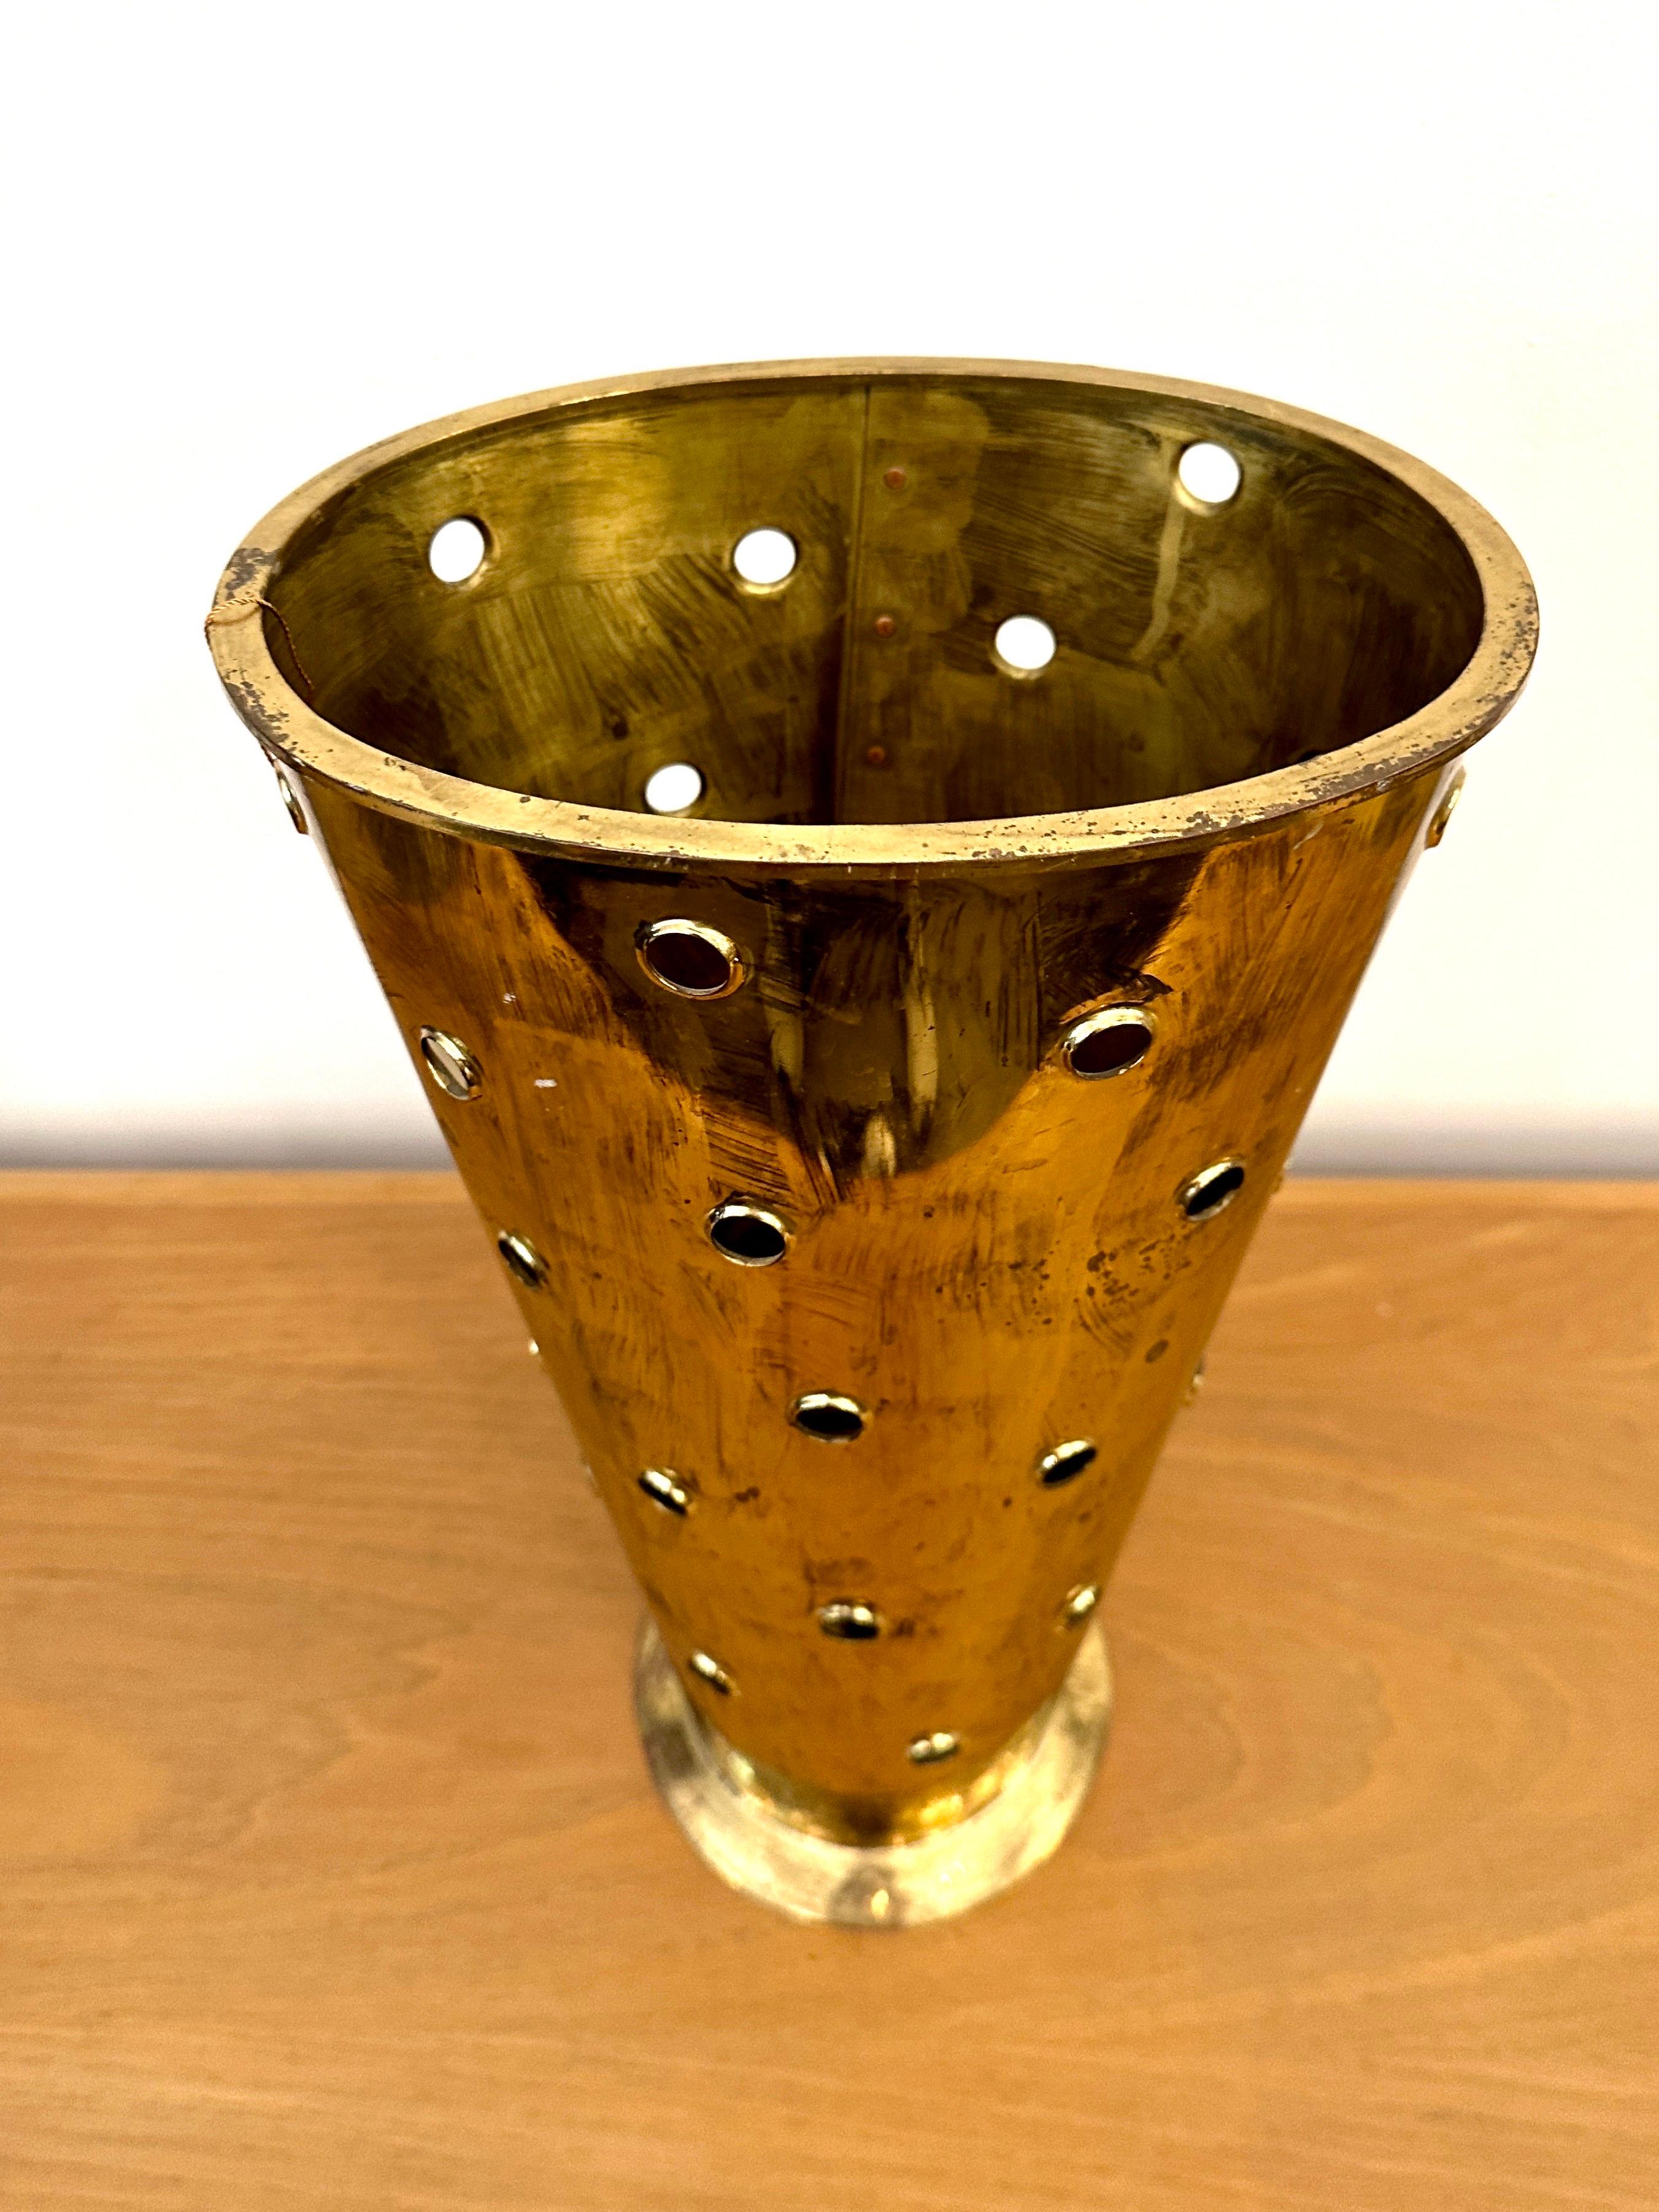 This handcrafted bronze umbrella stand is superb with footed base and playful perforations throughout.  Oval shaped, this shiny bronze fashioned from a single hammered and riveted sheet of patinated bronze.   THIS ITEM IS LOCATED AND WILL SHIP FROM